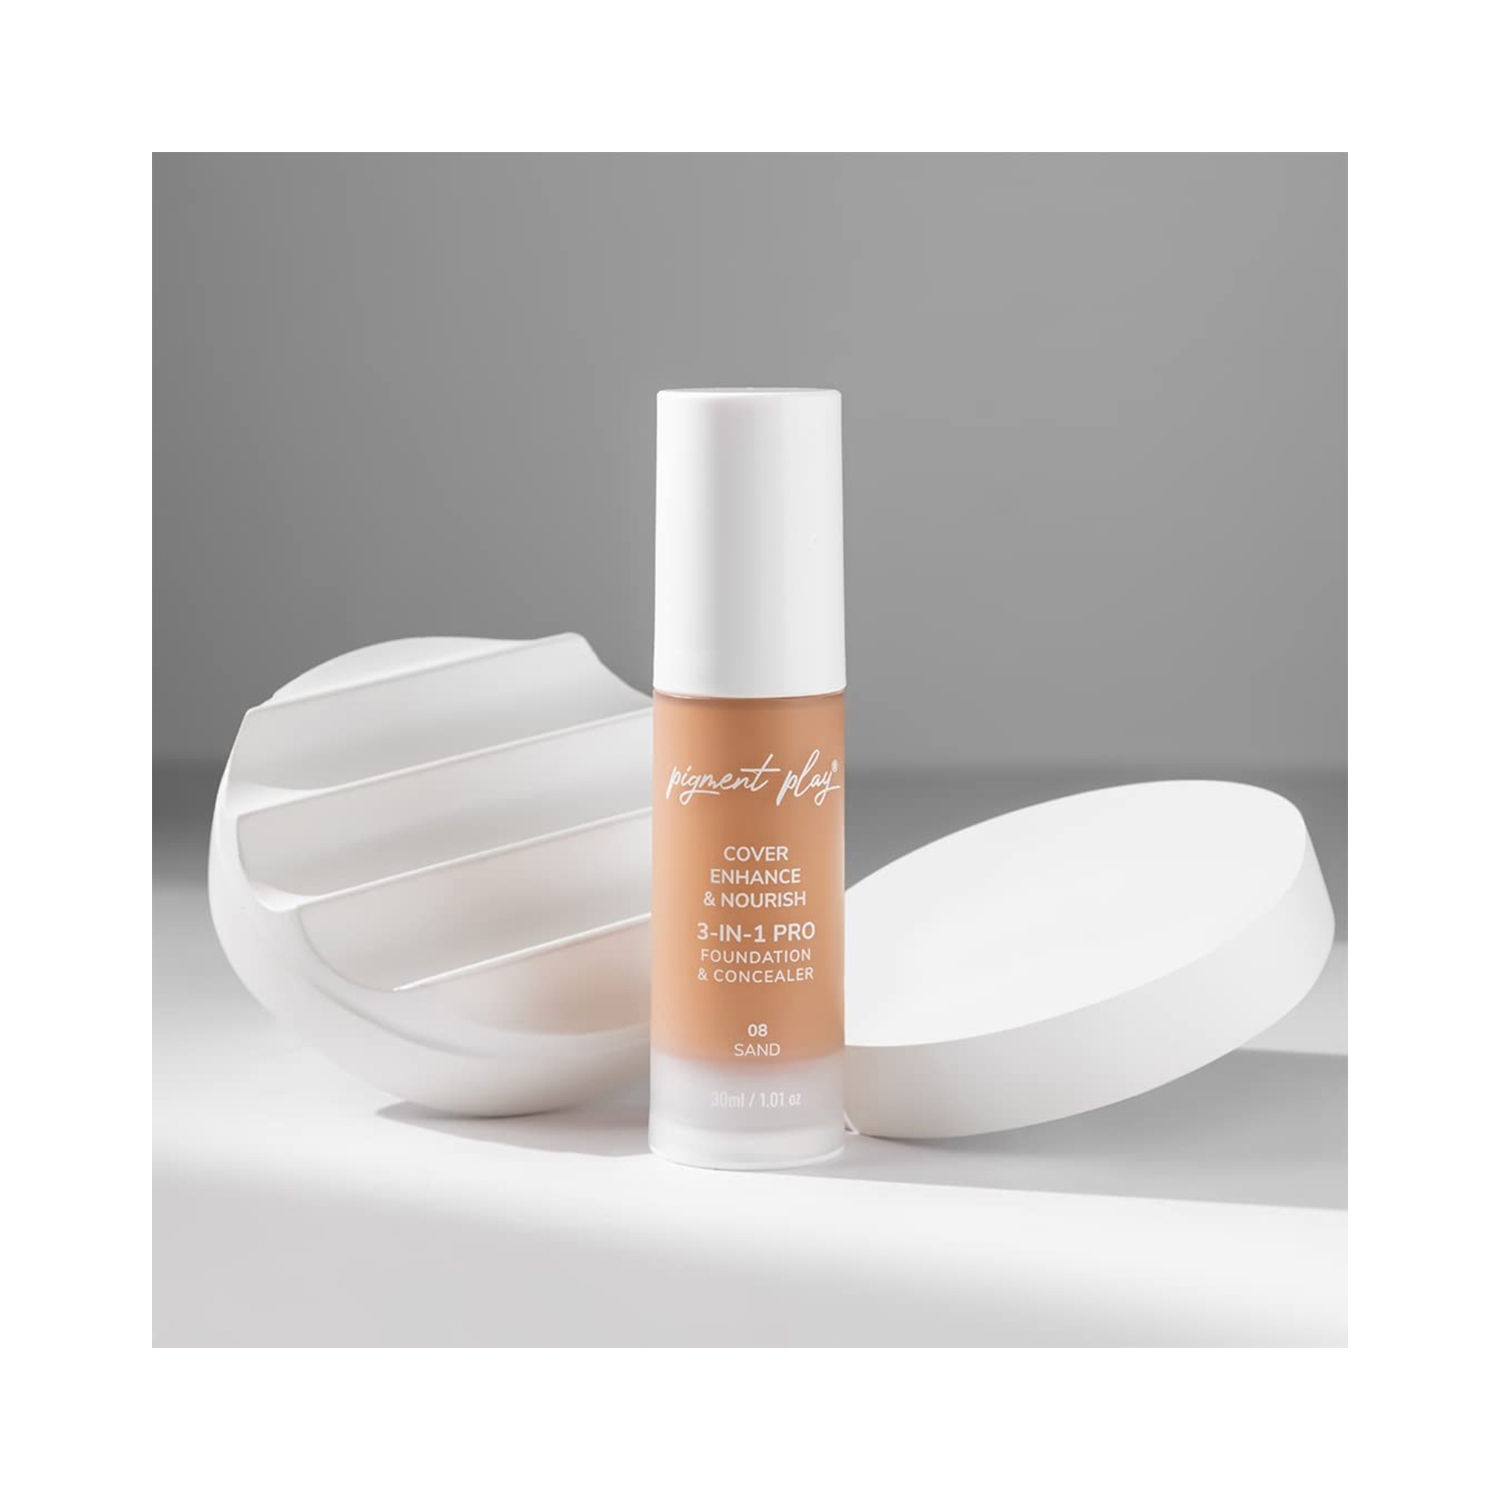 Pigment Play | Pigment Play 3-in-1 Cover + Enhance + Nourish Foundation & Concealer - 08 Sand (30ml)